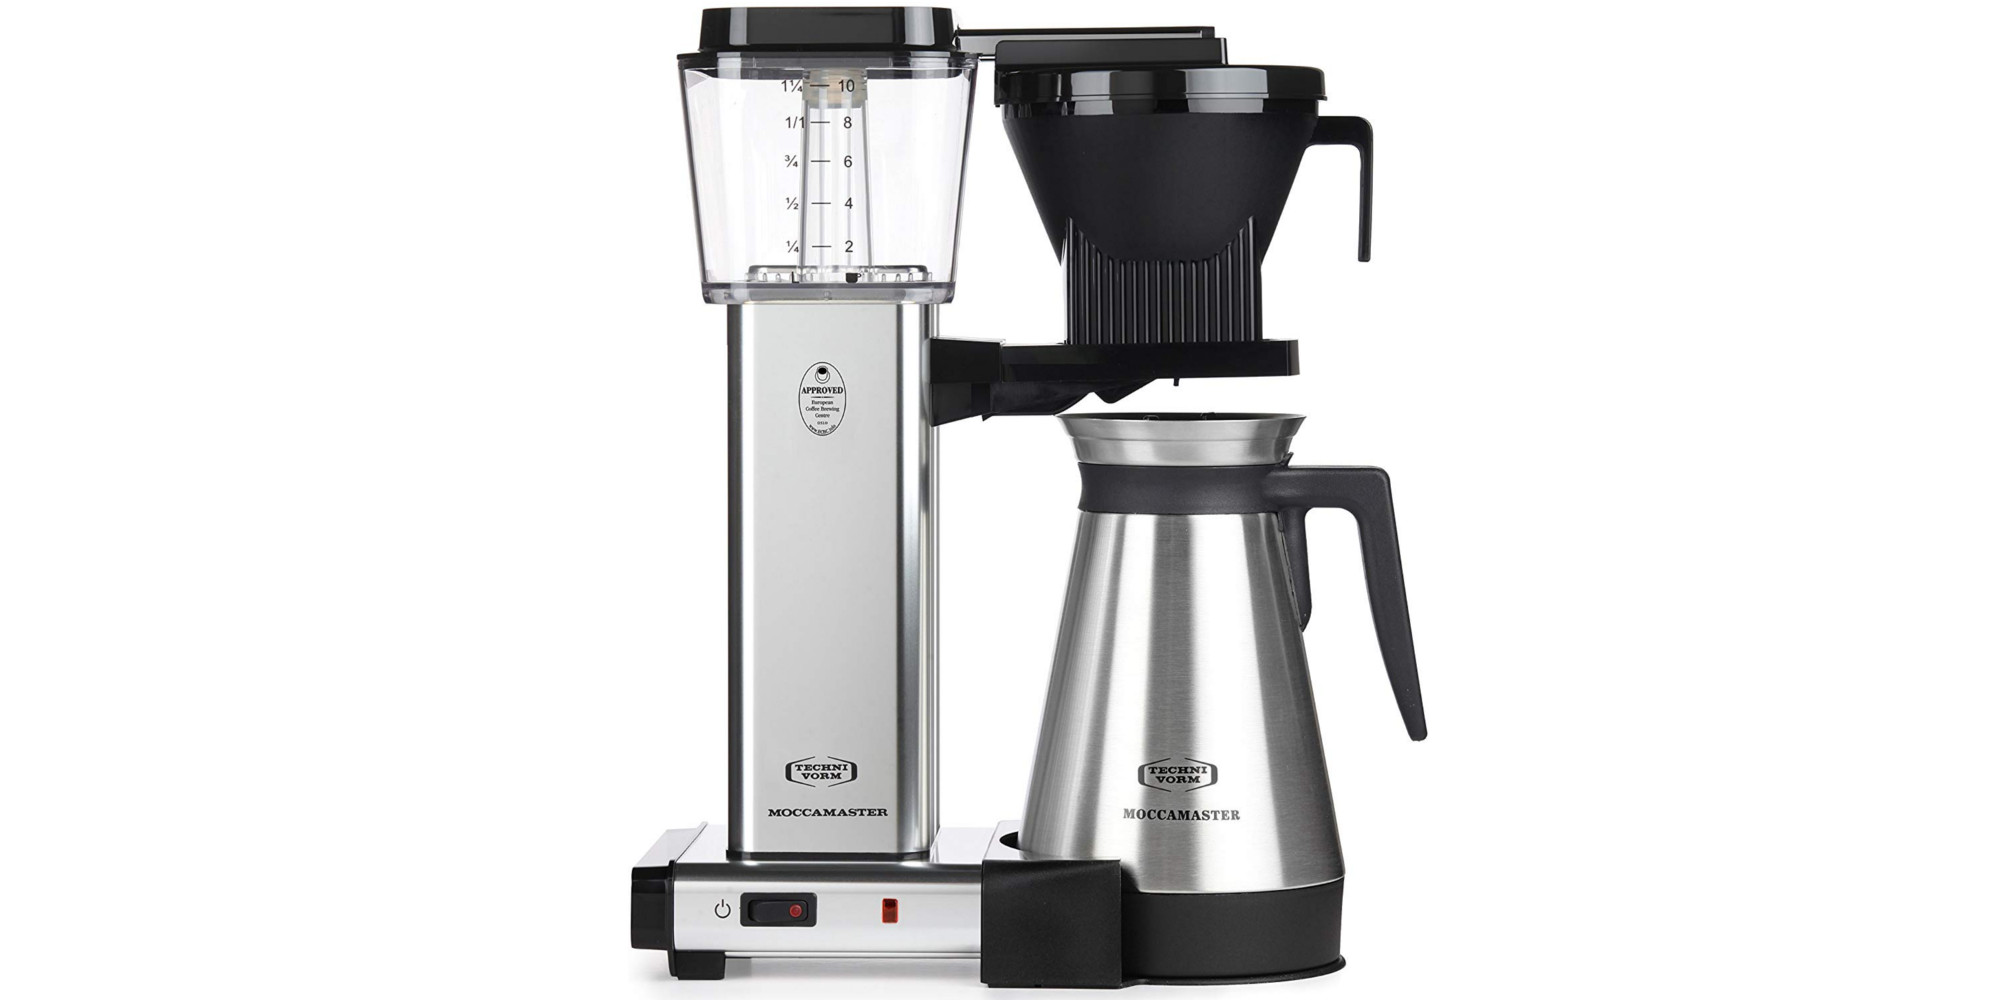 Additional Moccamaster Stainless Carafe